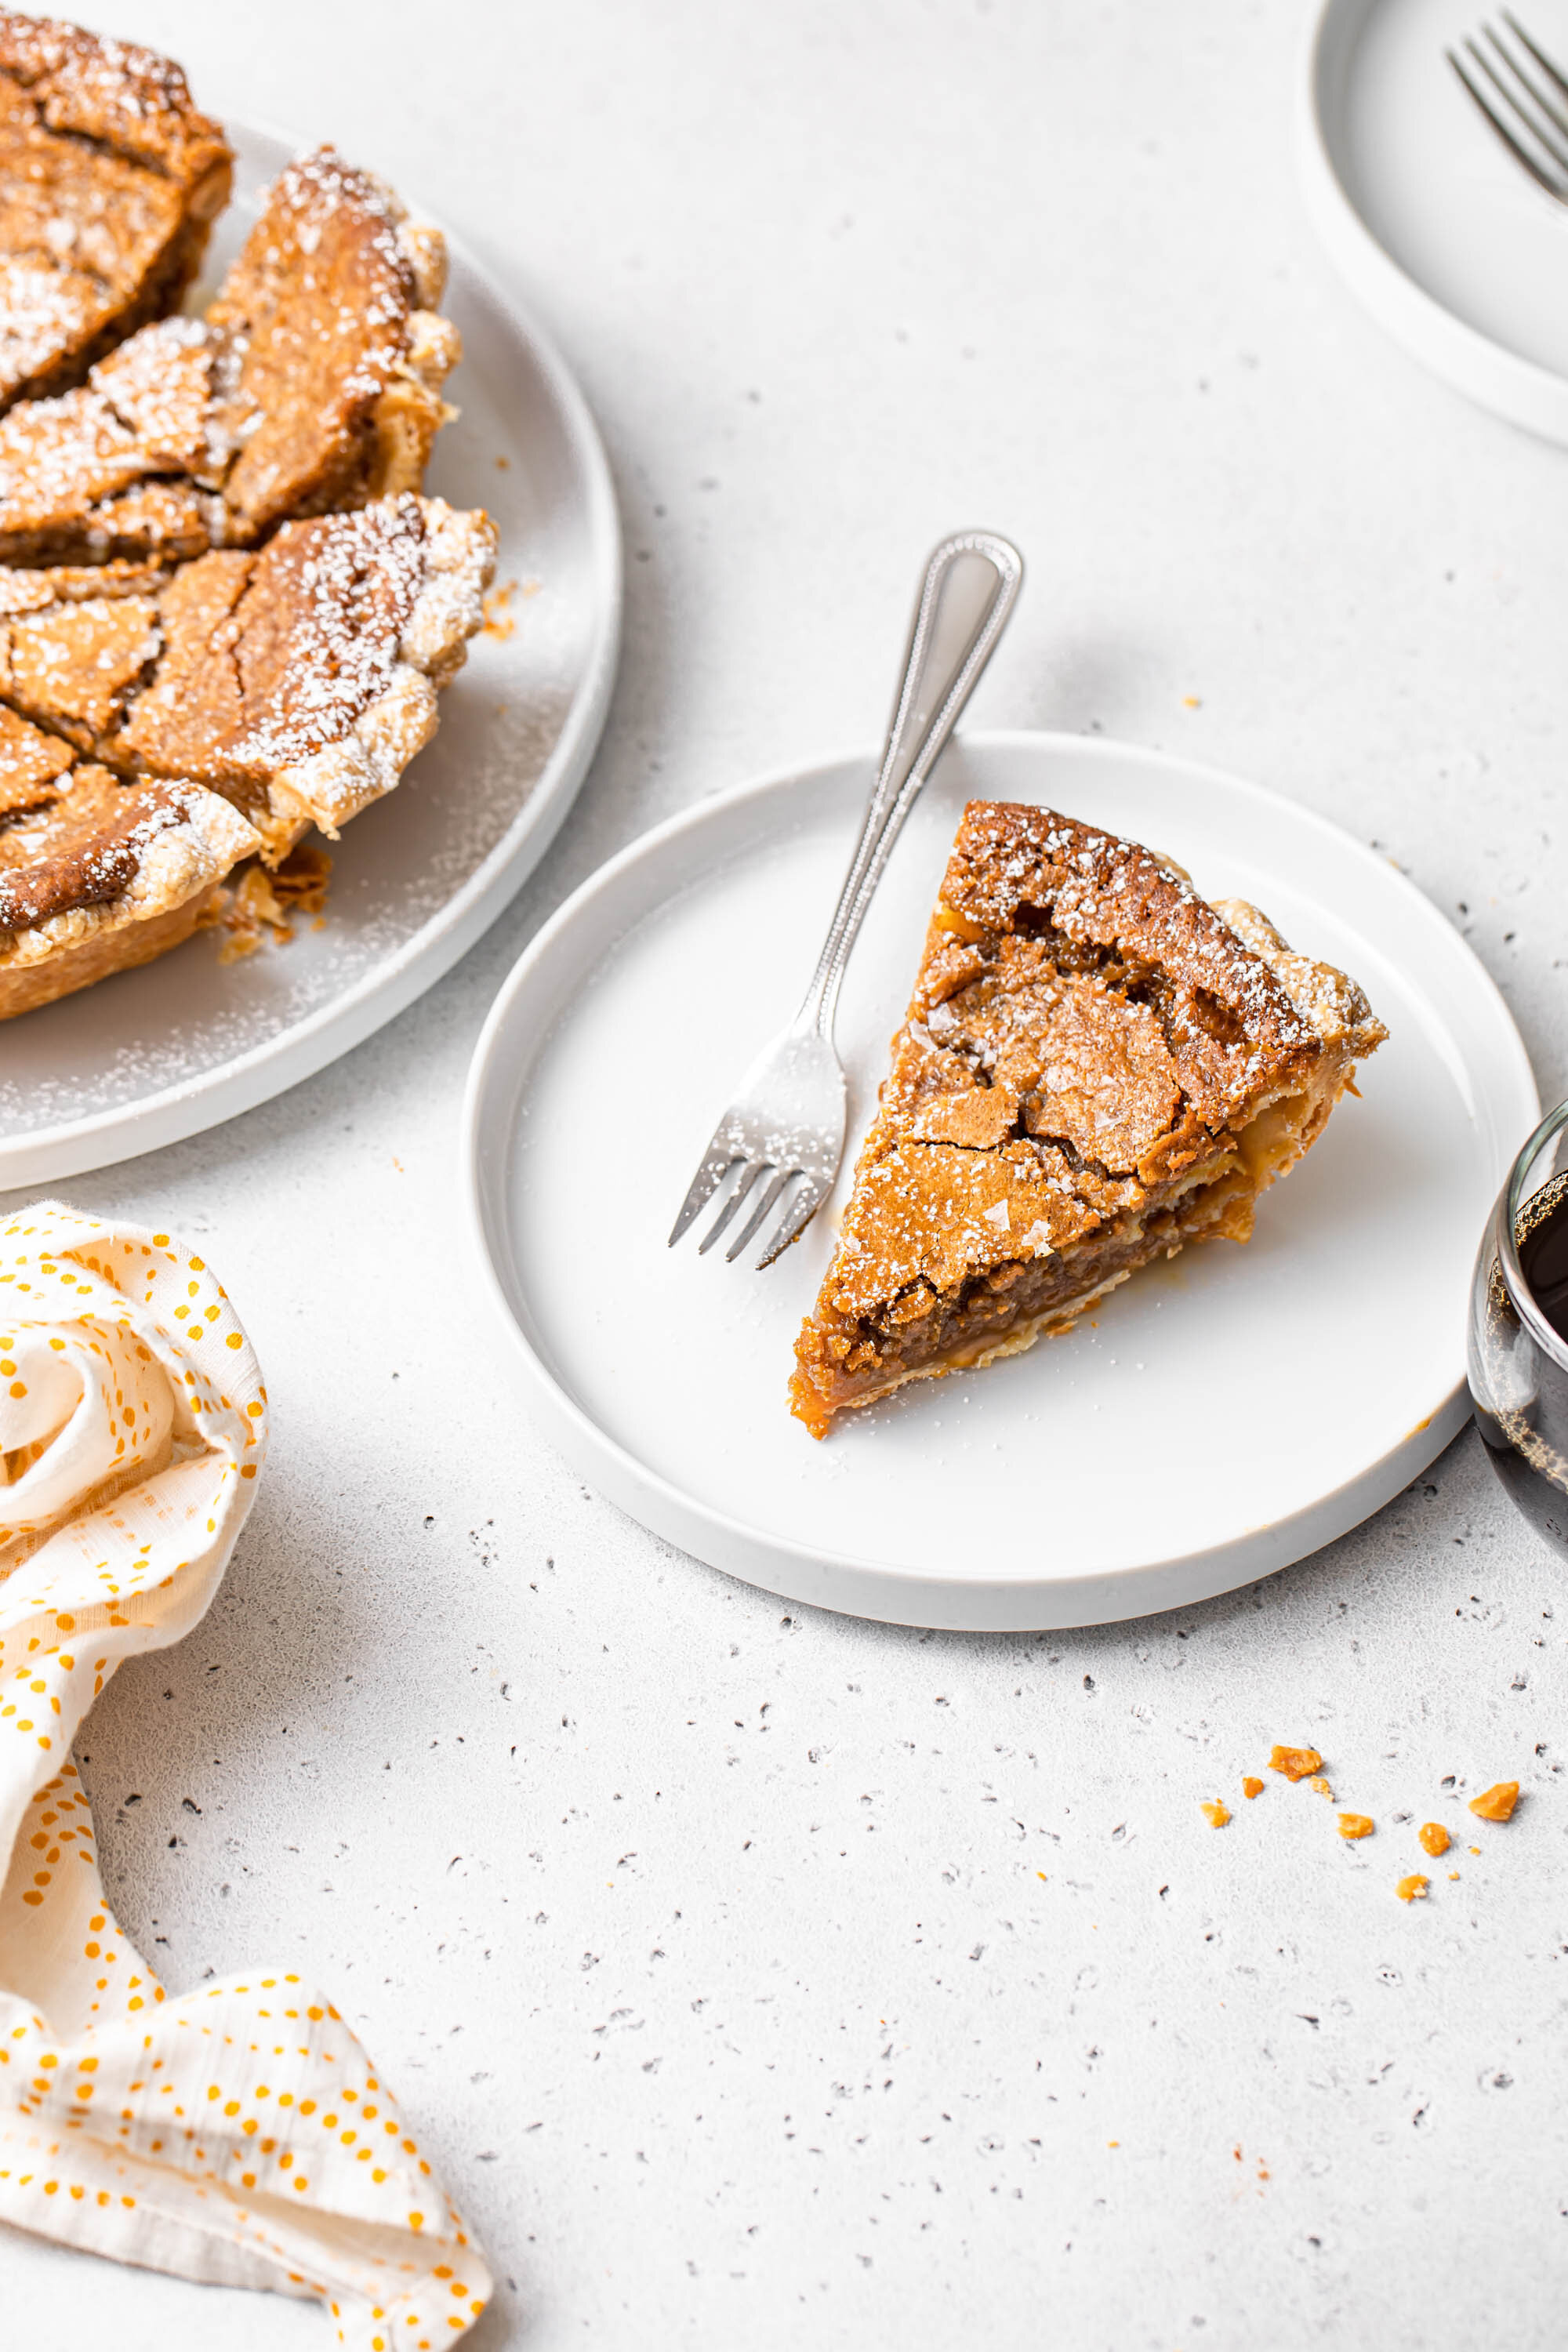 A slice of French Canadian Maple Sugar Pie with a gooey, brown sugar filling and crispy top.